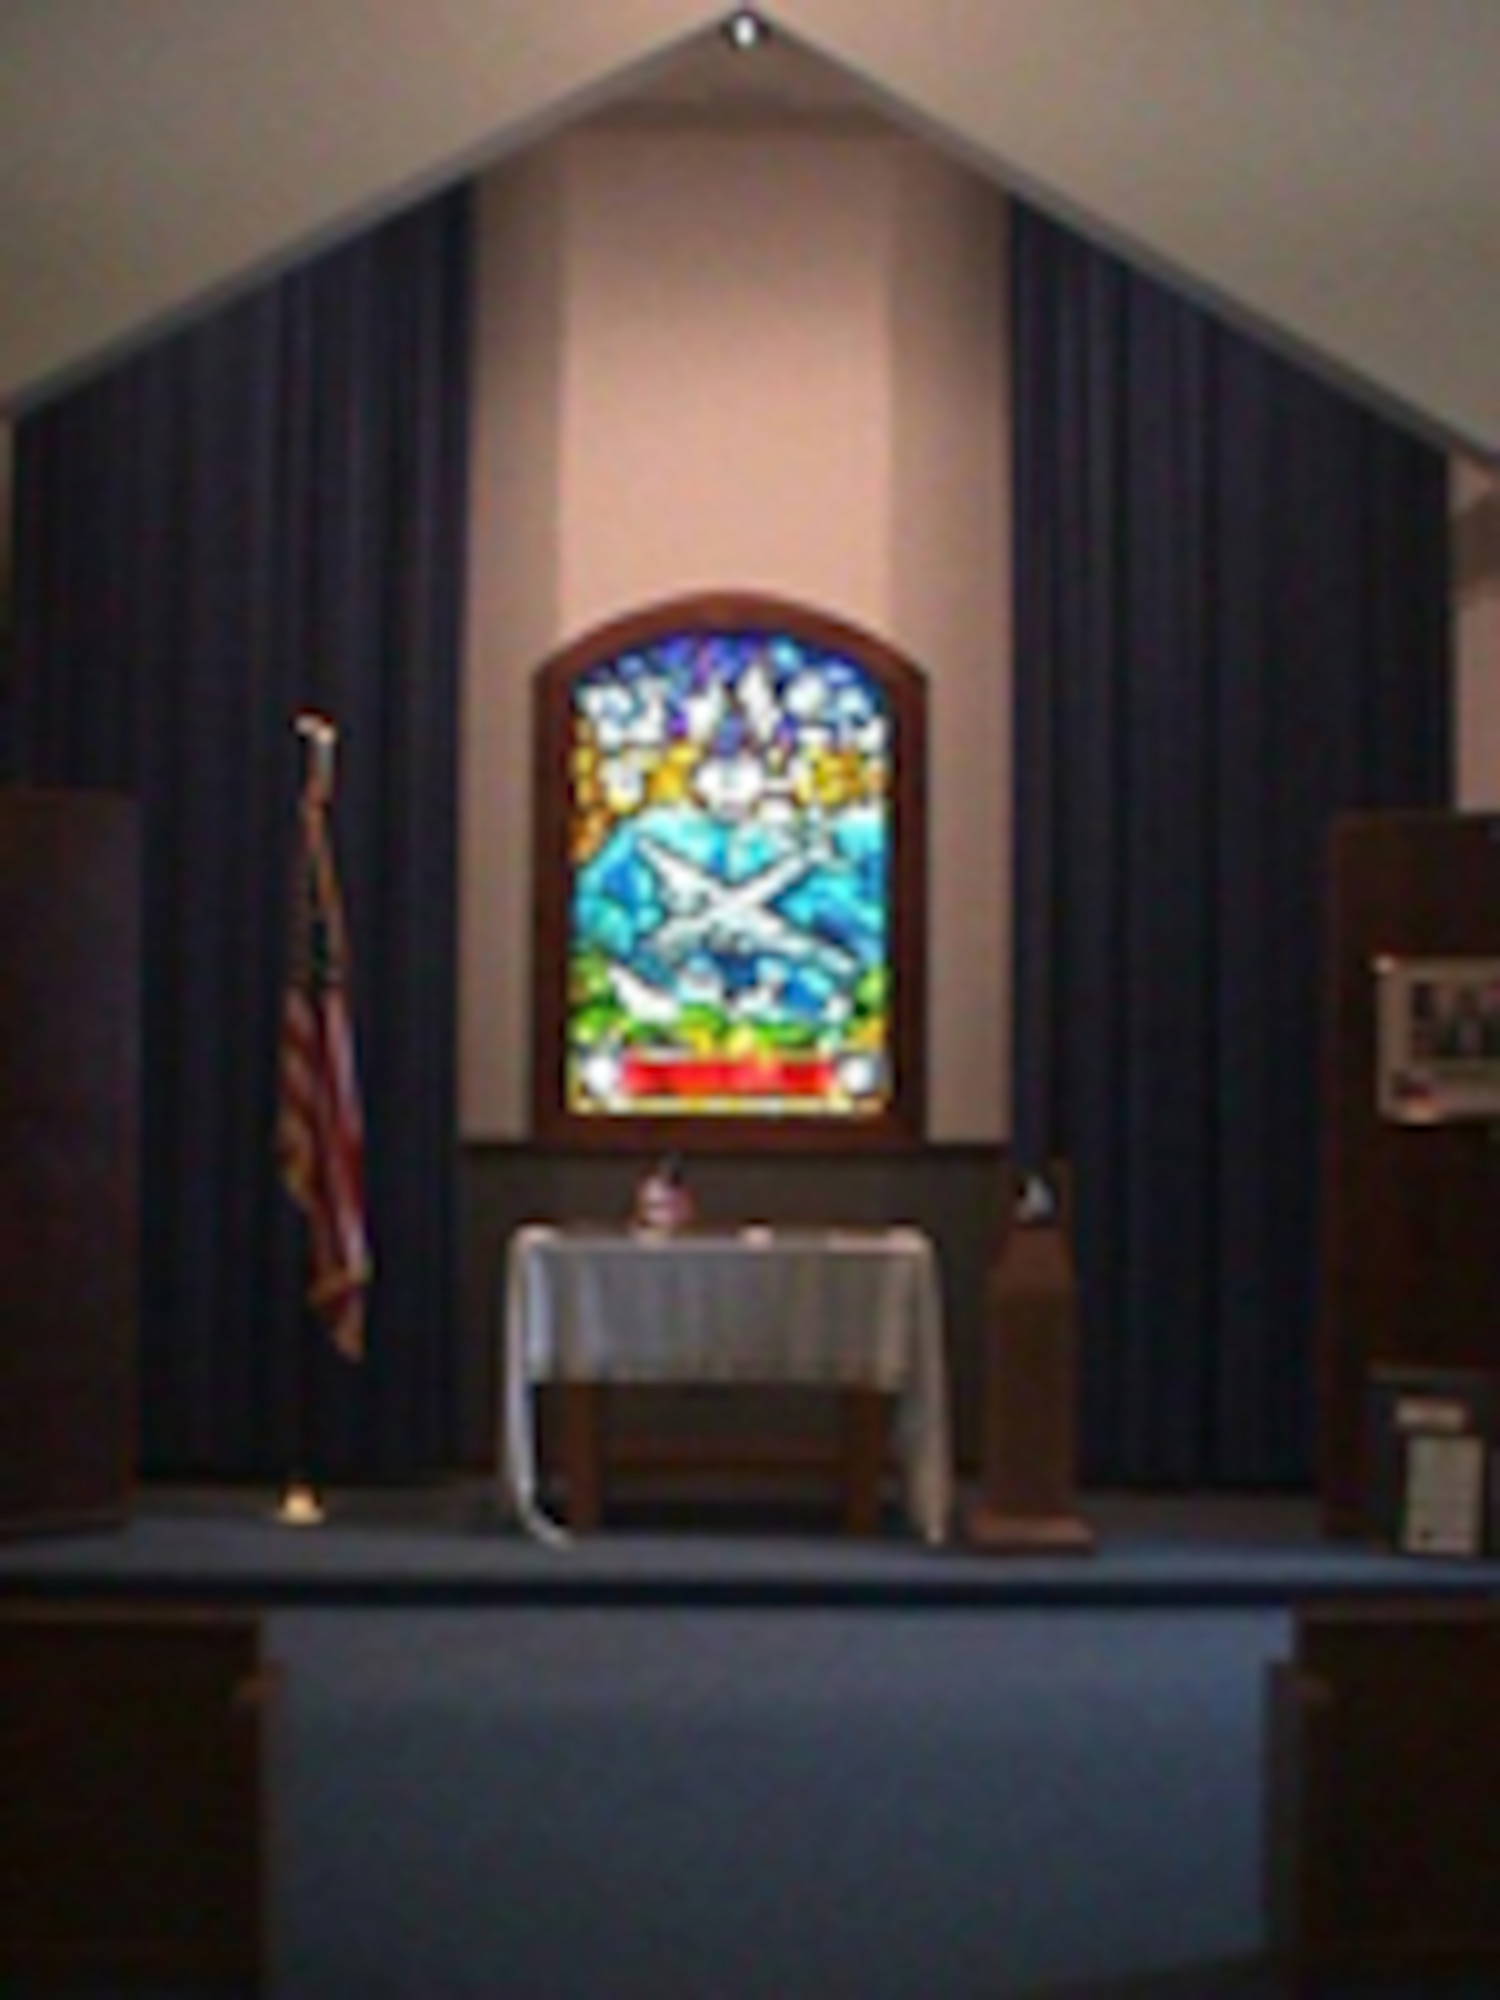 Today the Chapel houses the 384th Bomb Group Memorial Stained Glass Window, an exact duplicate of a memorial stained glass window donated by the 384th Bomb Group to the Parish Church of St. James the Apostle in the village of Grafton Underwood, near Kettering, England. (Hill Field was the parent base of Wendover Army Air Field in western Utah, where the 384th trained in 1943 in Boeing B-17 Flying Fortresses for action in Europe in World War II. Grafton Underwood was near USAAF Station 106, home base of the 384th in the European theater of operations during the war.) 